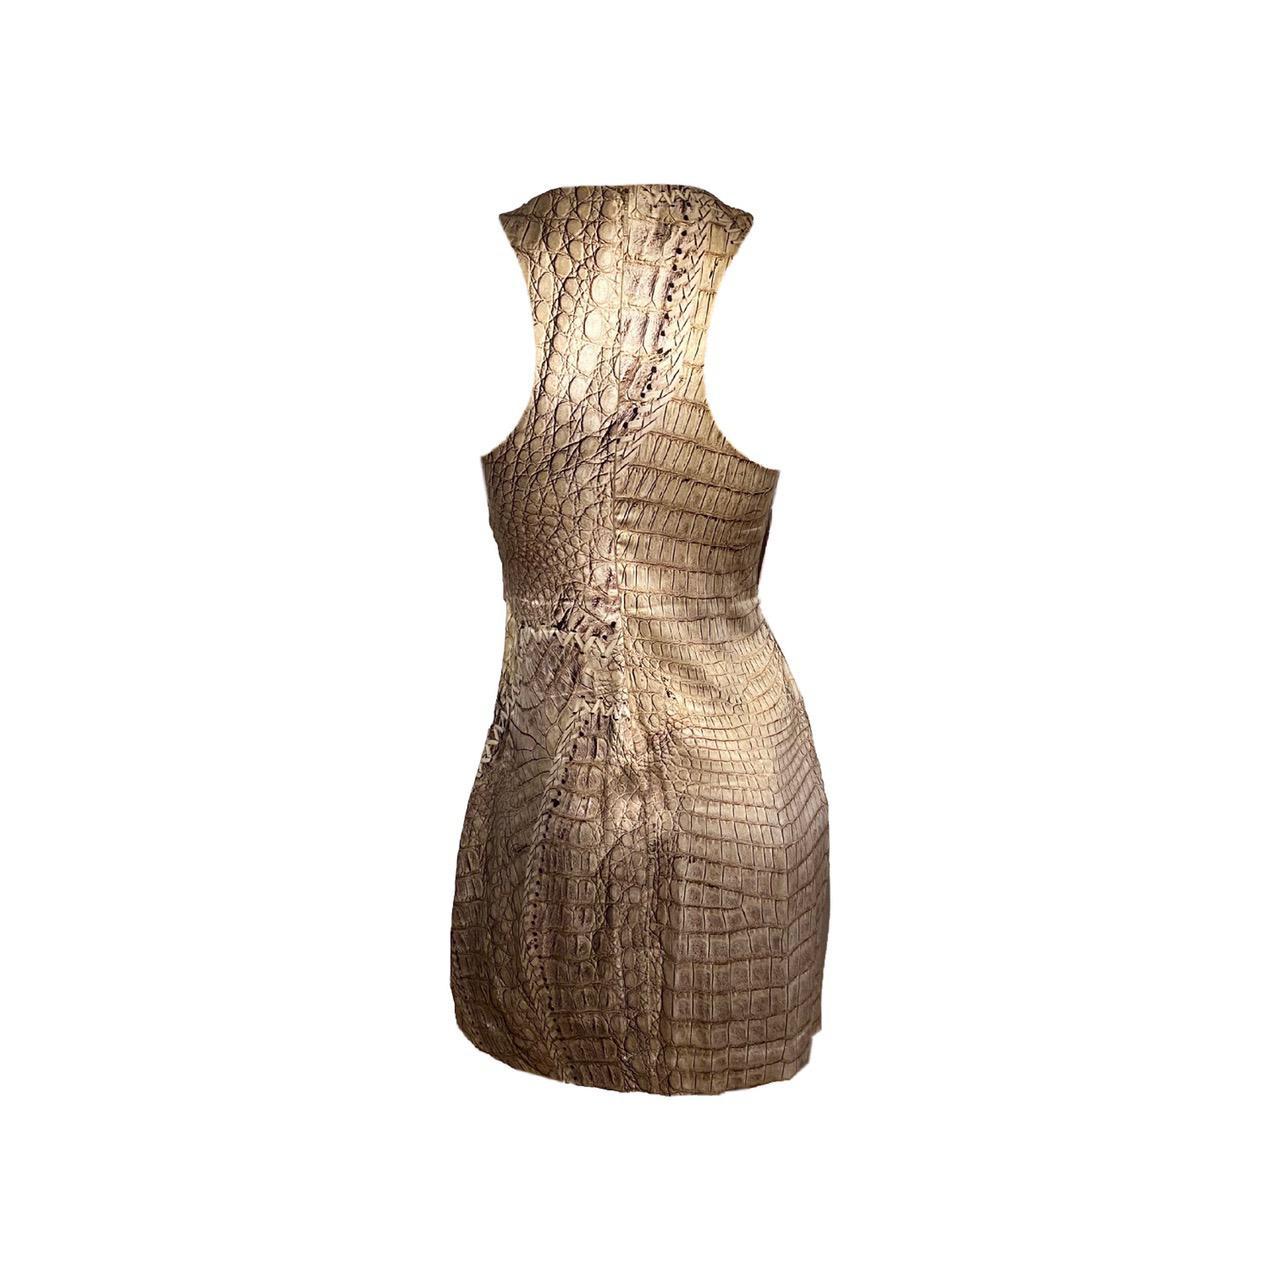 Roberto Cavalli Tan Silk short dress from the S/S 2011 collection, which marks the 40th anniversary of the designer. The dress has a lace-up front top matched by a sequence of side gradient fringes. Zip closure system on the back.

Size IT 42

Pit